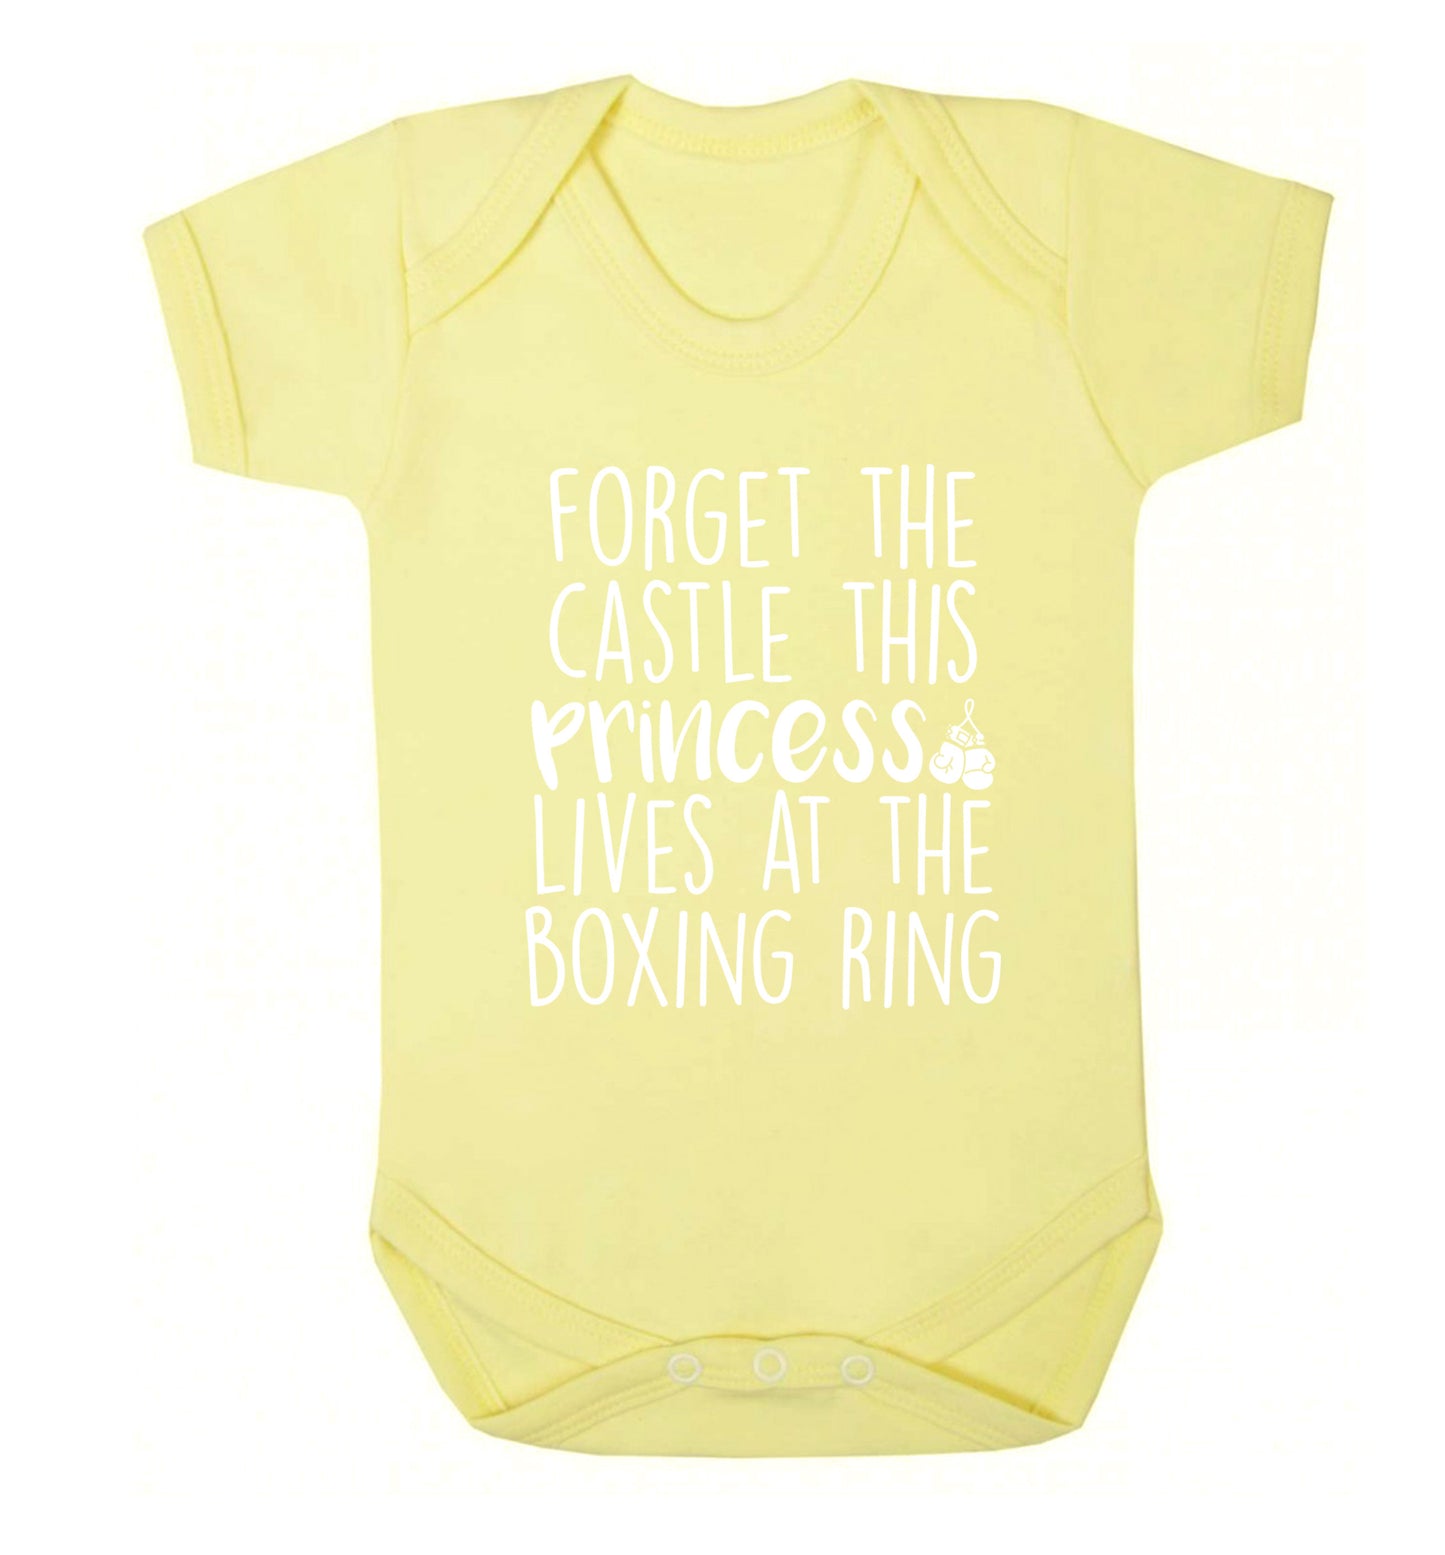 Forget the castle this princess lives at the boxing ring Baby Vest pale yellow 18-24 months